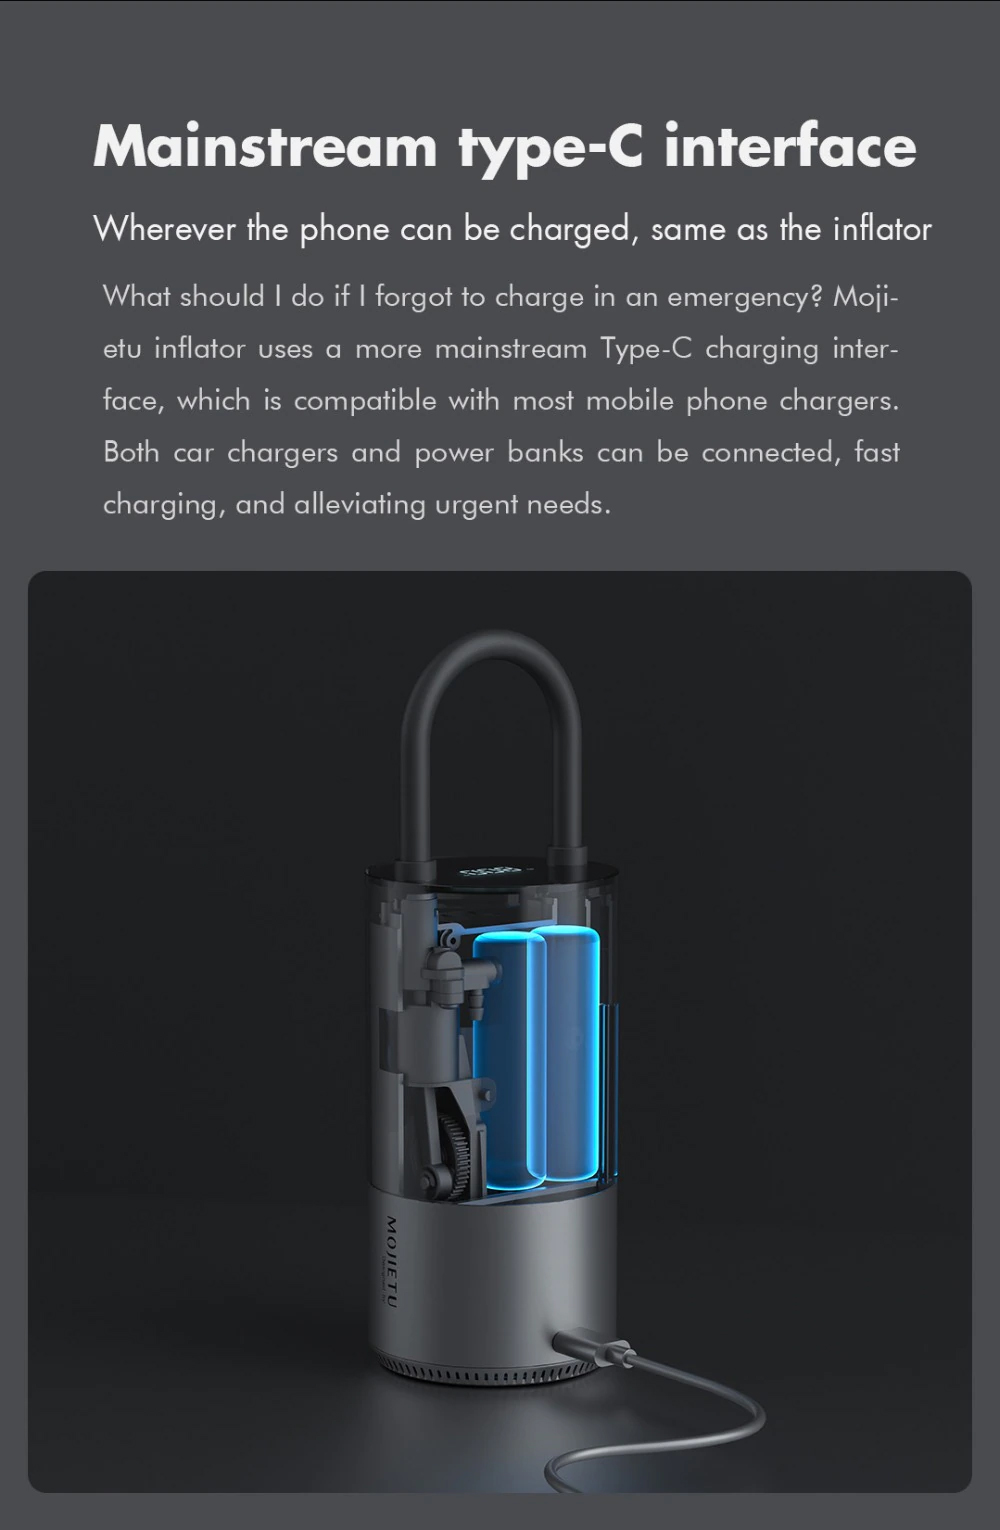 What should I do if I forgot to charge in an emergency? Moiietu inflator uses a more mainstream Type-C charging inter- face, which is compatible with most mobile phone chargers. Both car chargers and power banks can be connected, fast charging, and alleviating urgent needs.